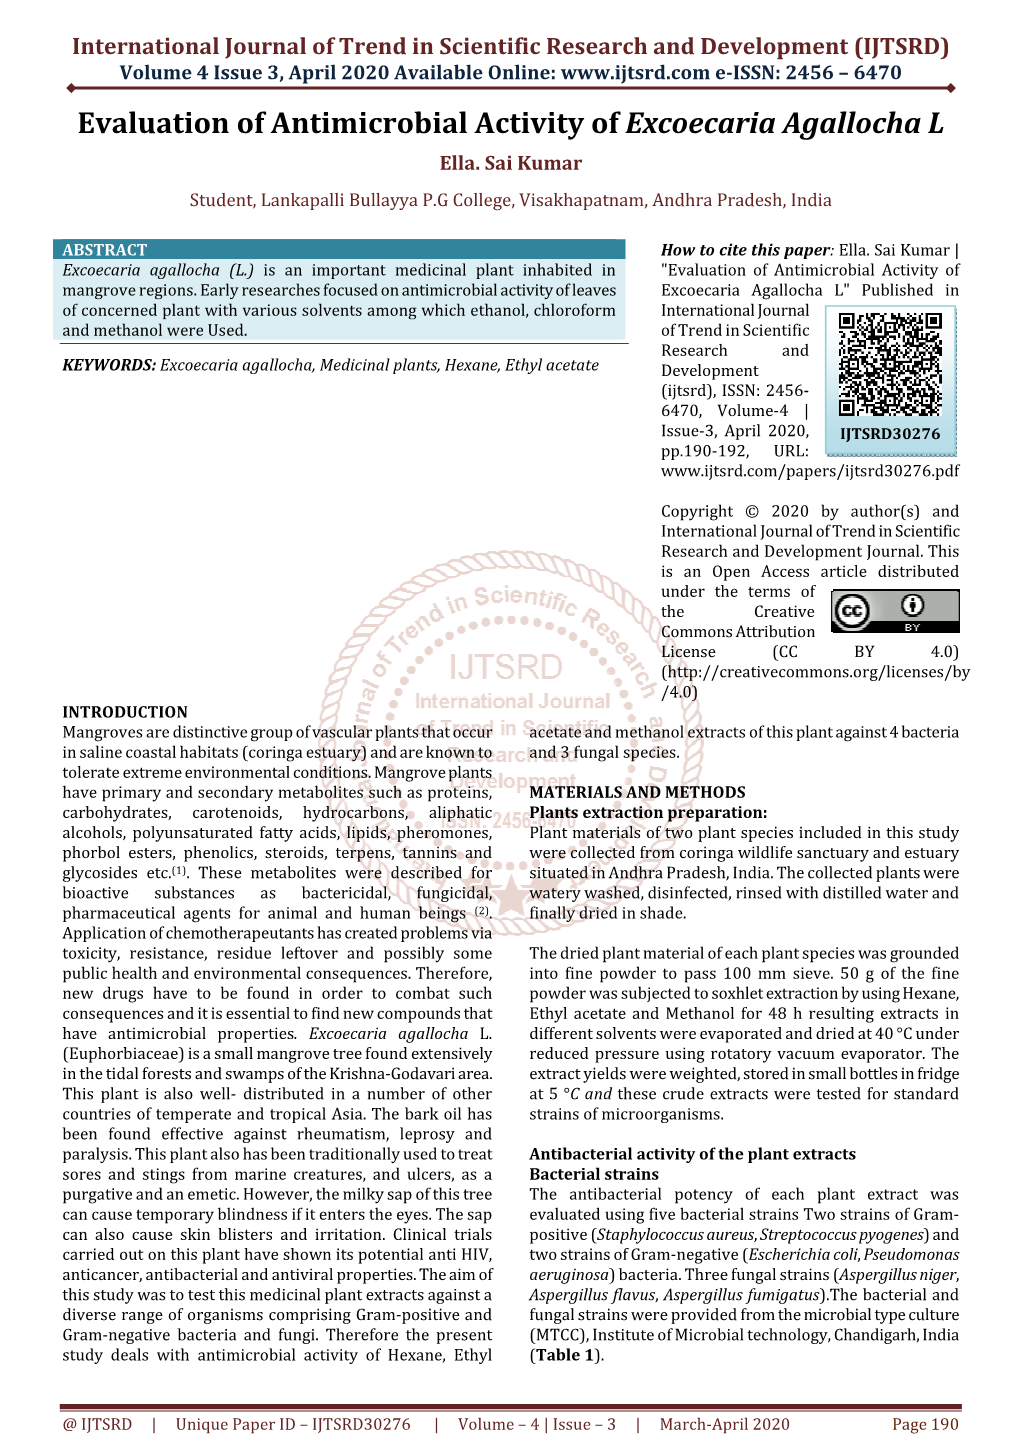 32 Evaluation of Antimicrobial Activity of Excoecaria Agallocha L